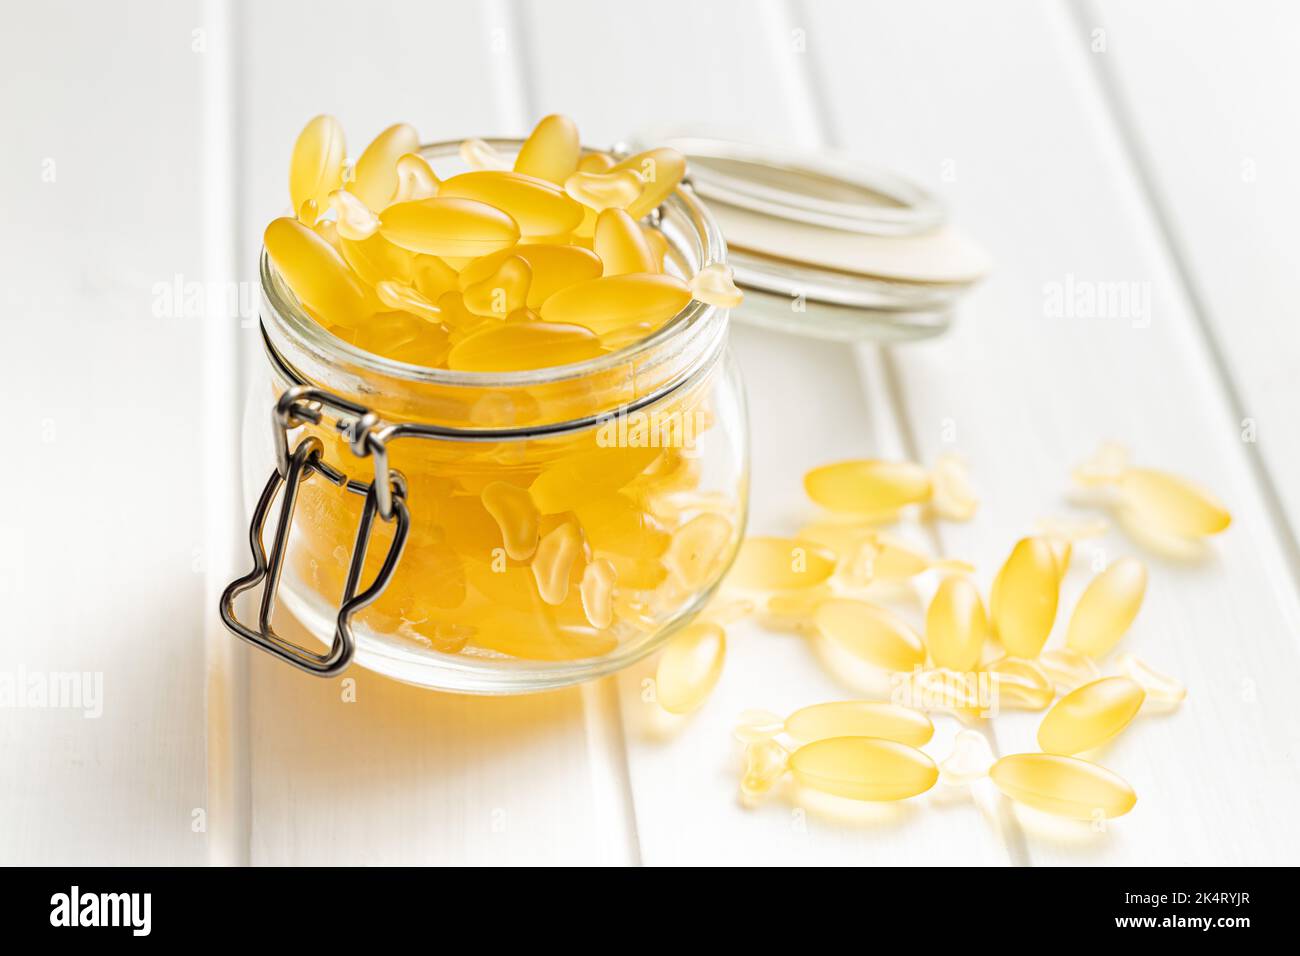 Fish oil capsules. Yellow omega 3 pills in jar on the white table. Stock Photo